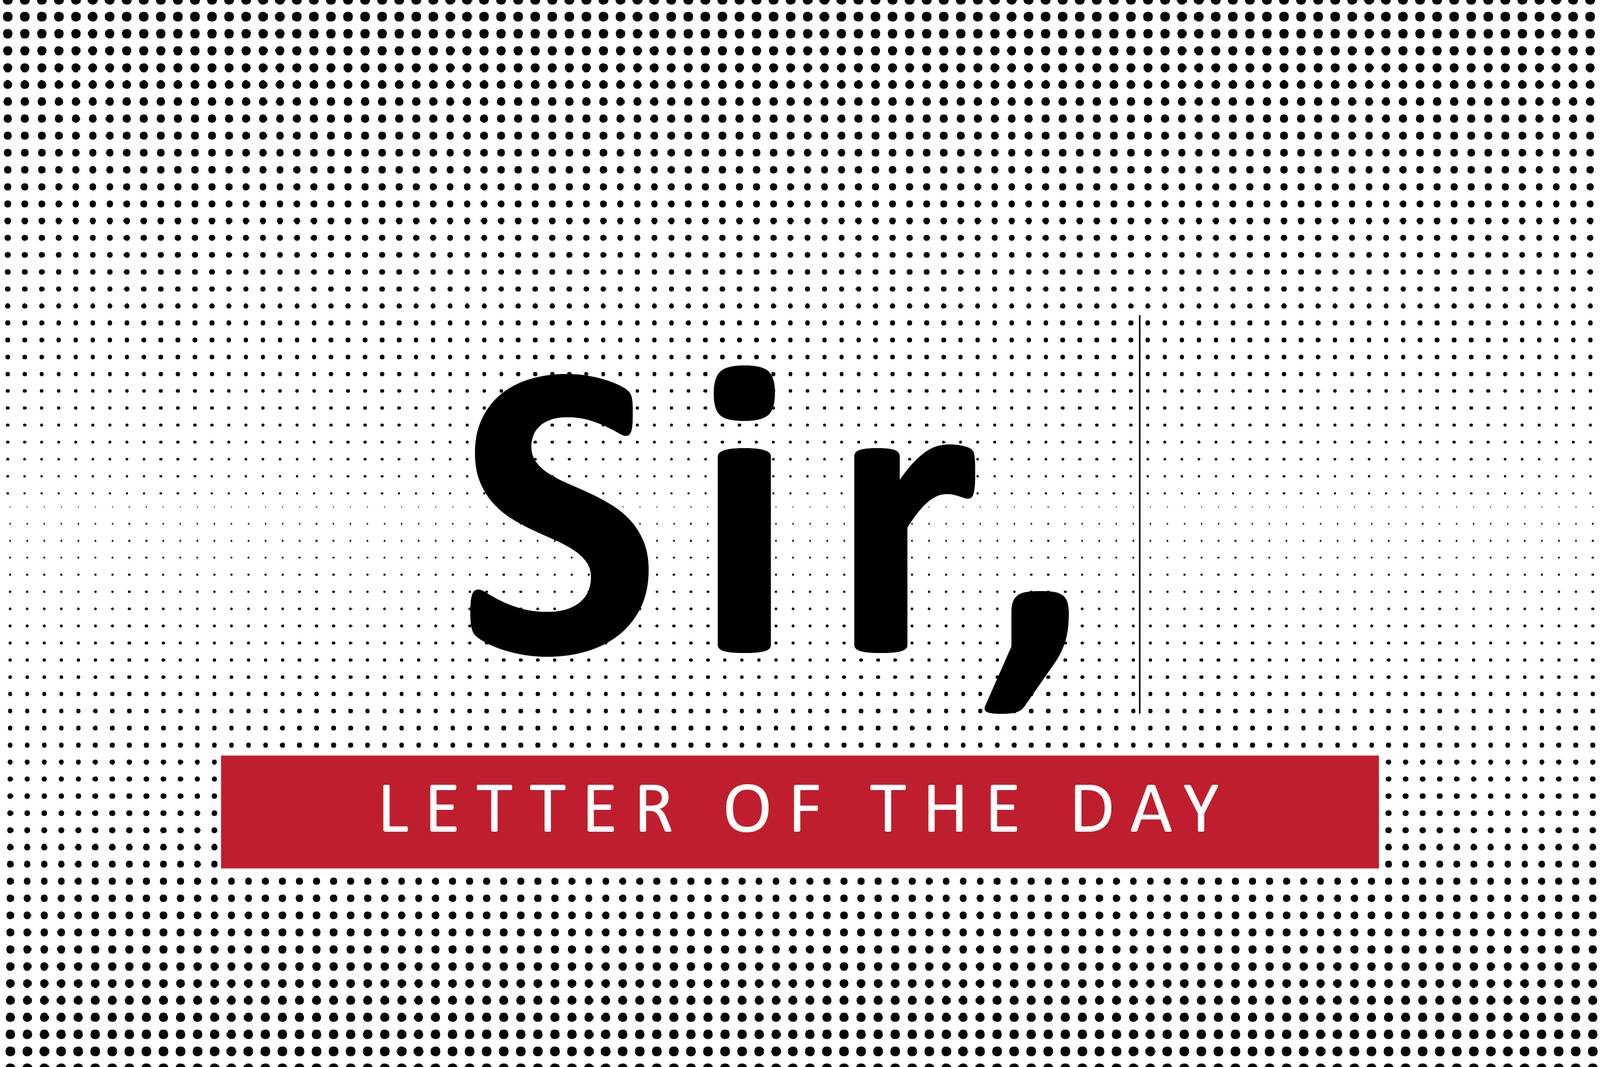 Letter of the Day